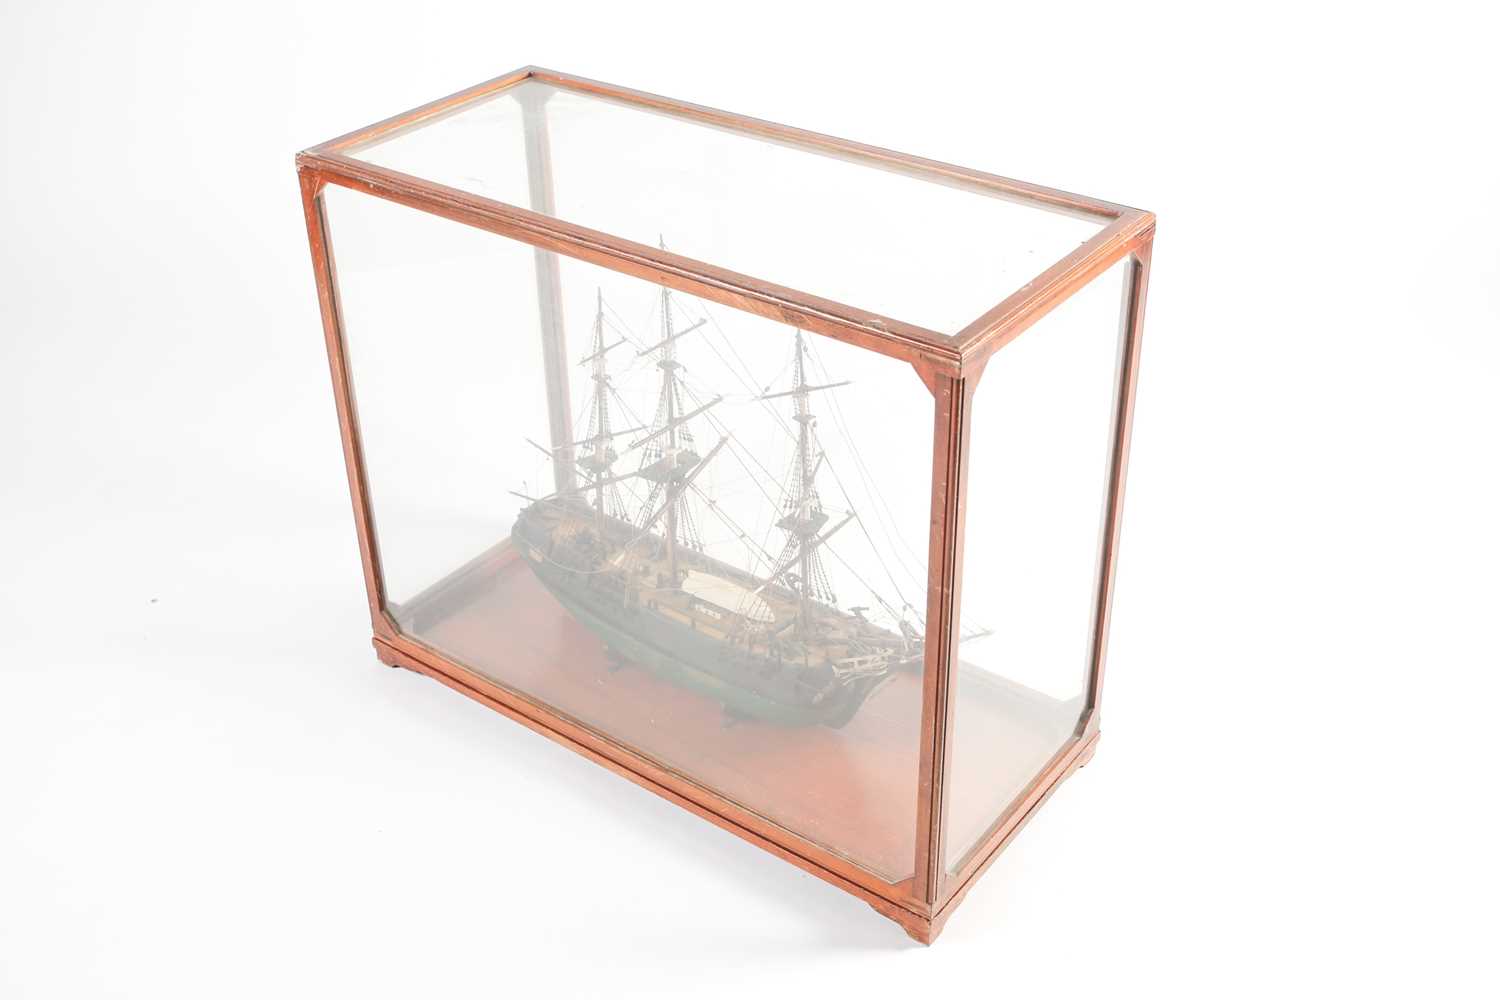 A scale model of the full-rigged HM Bounty with painted detail. Housed in a glazed display case. - Image 7 of 7